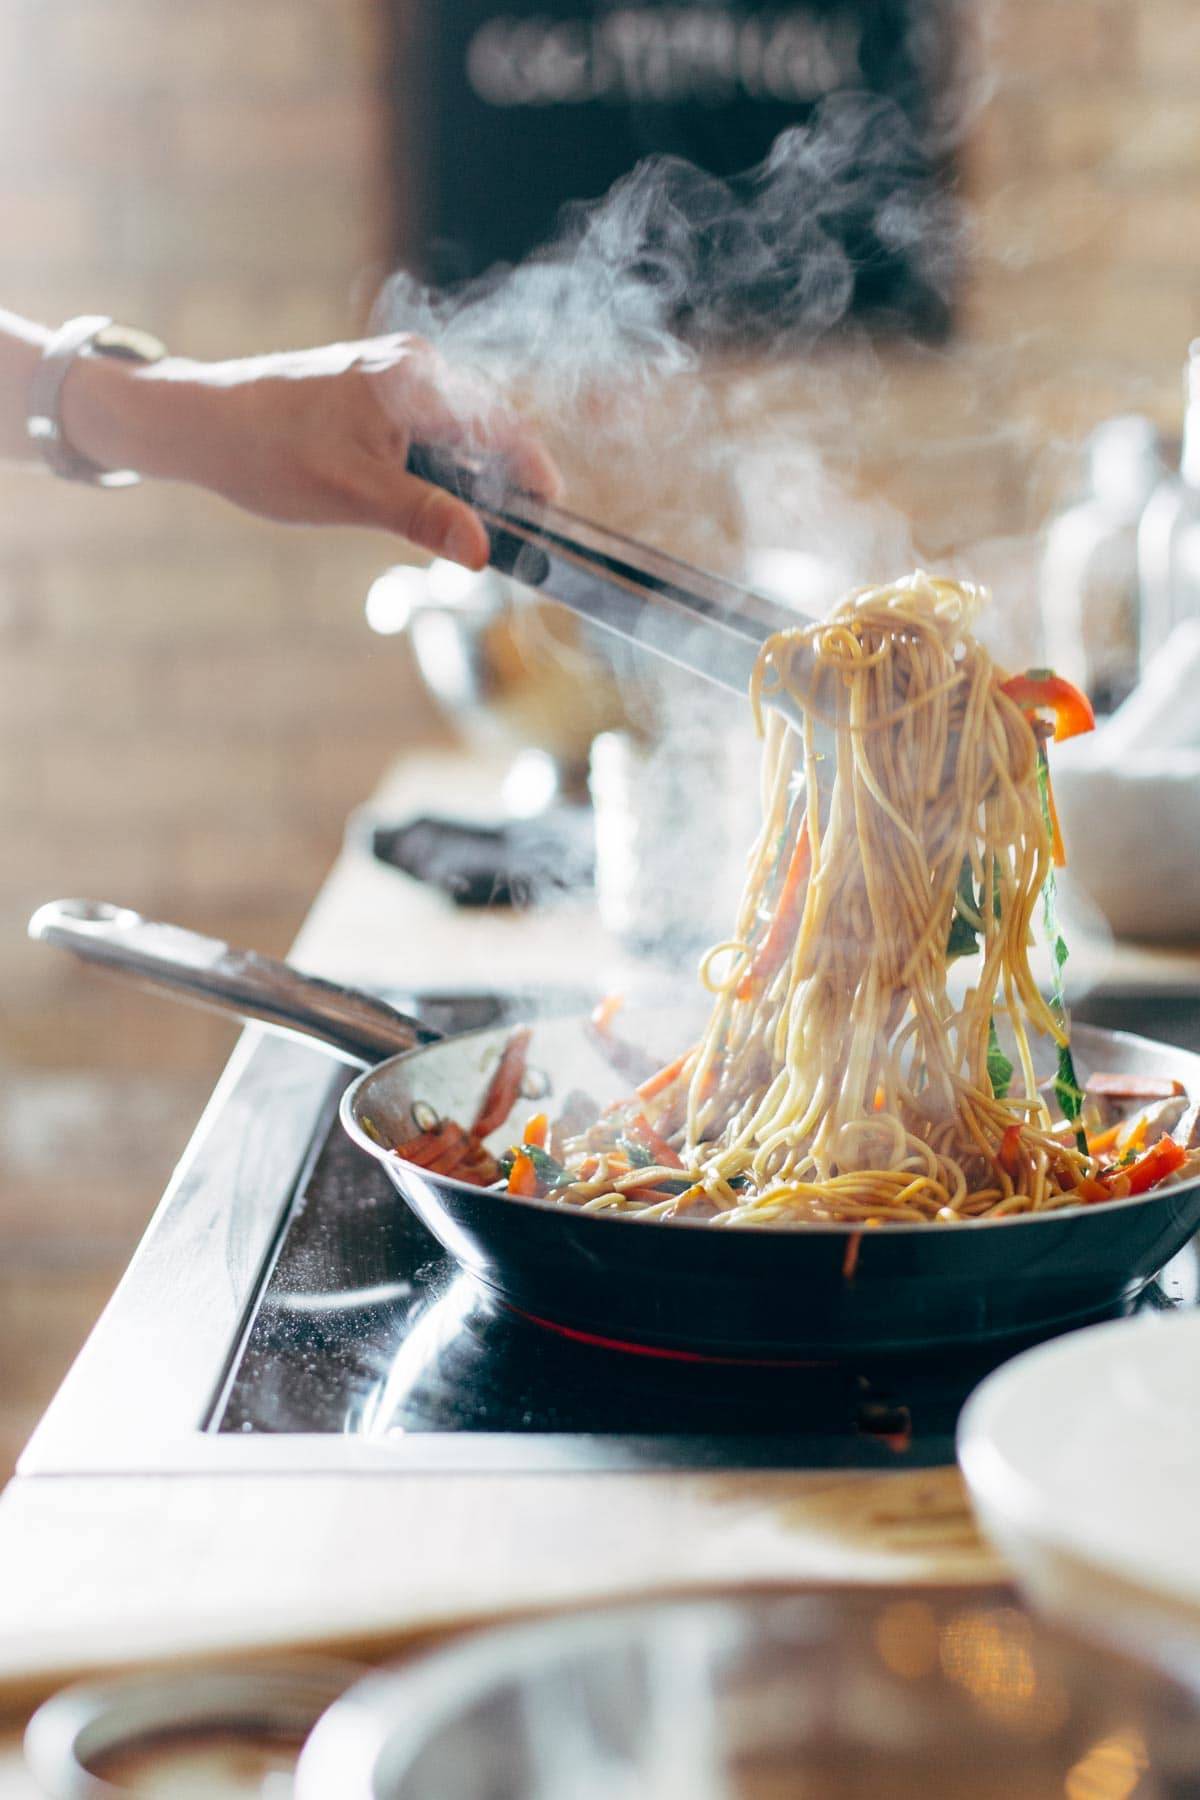 How Do You Make Lo Mein Noodles At Home?